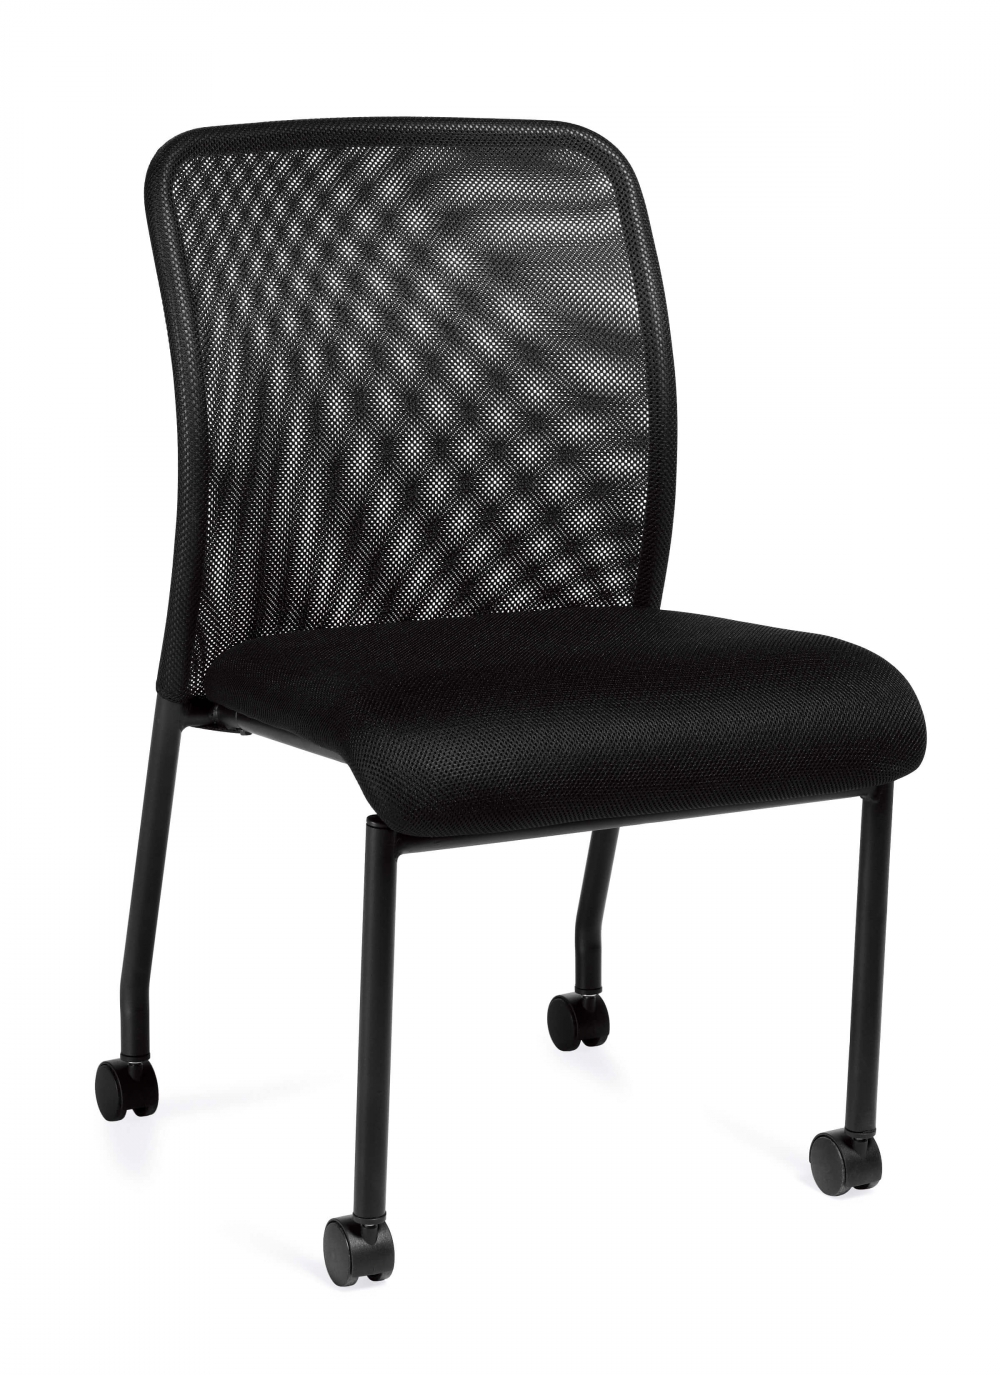 office-furniture-chairs-mesh-chairs.jpg